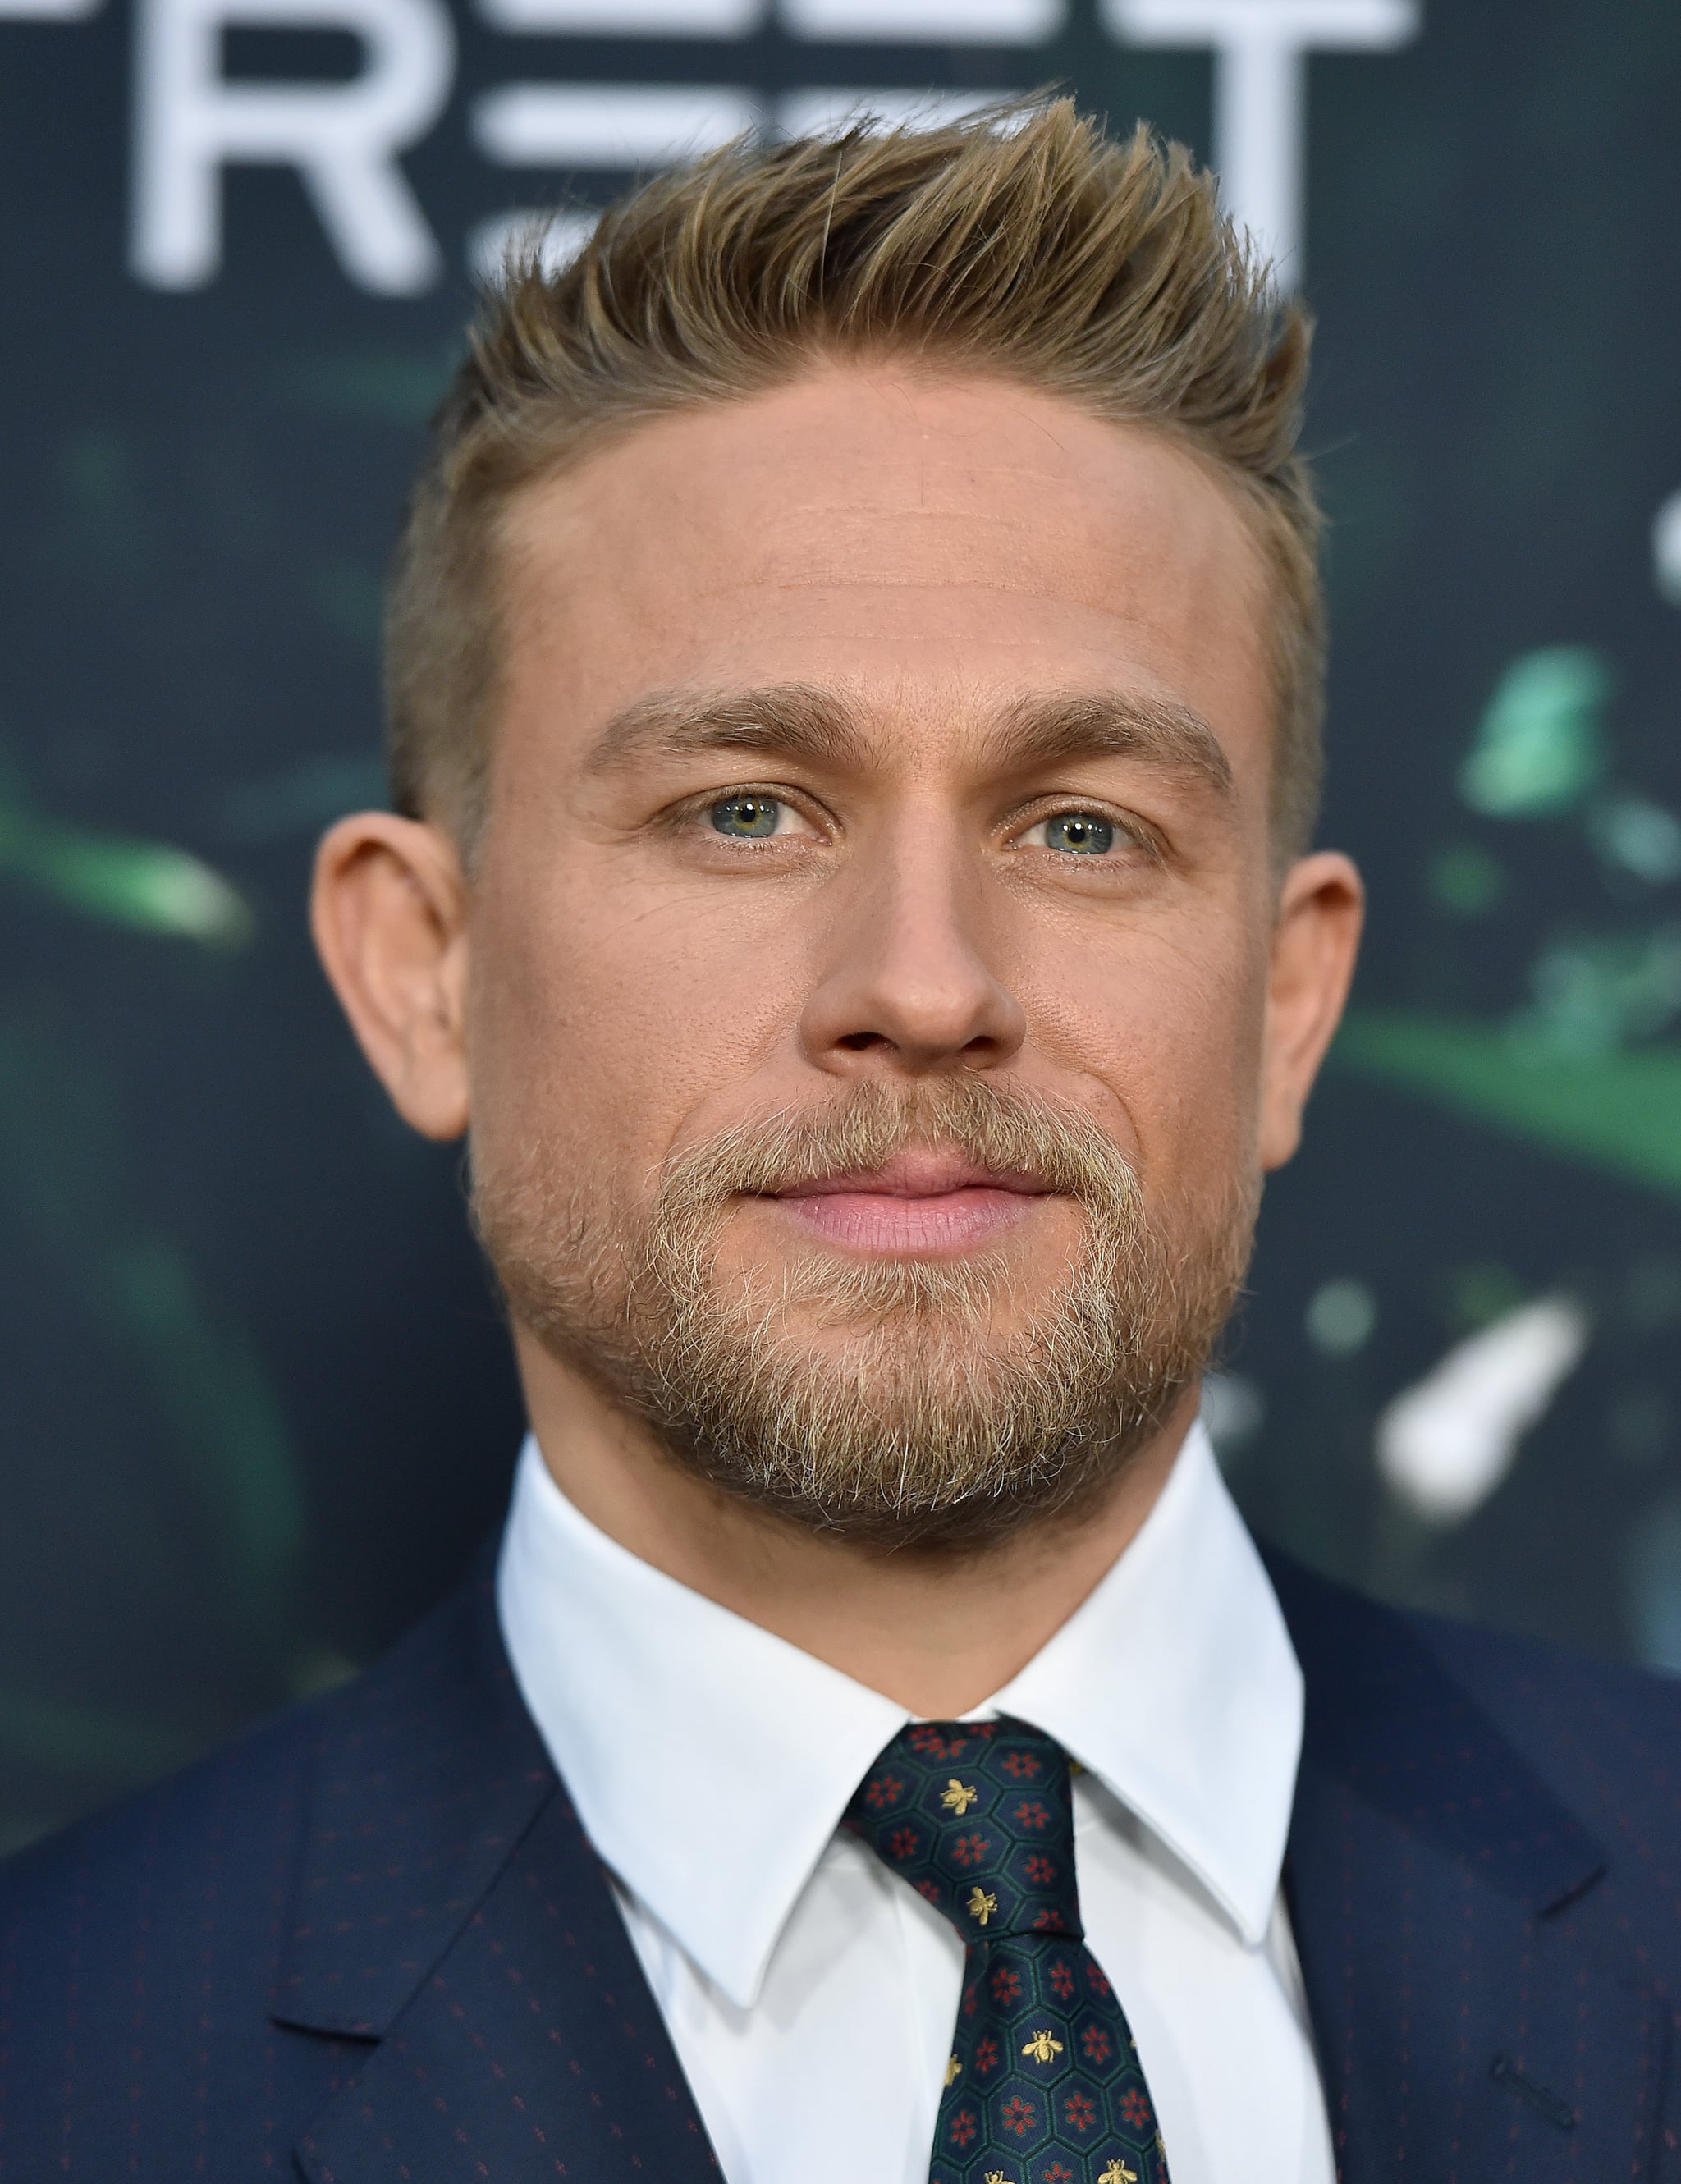 Catching up with King Arthur actor Charlie Hunnam